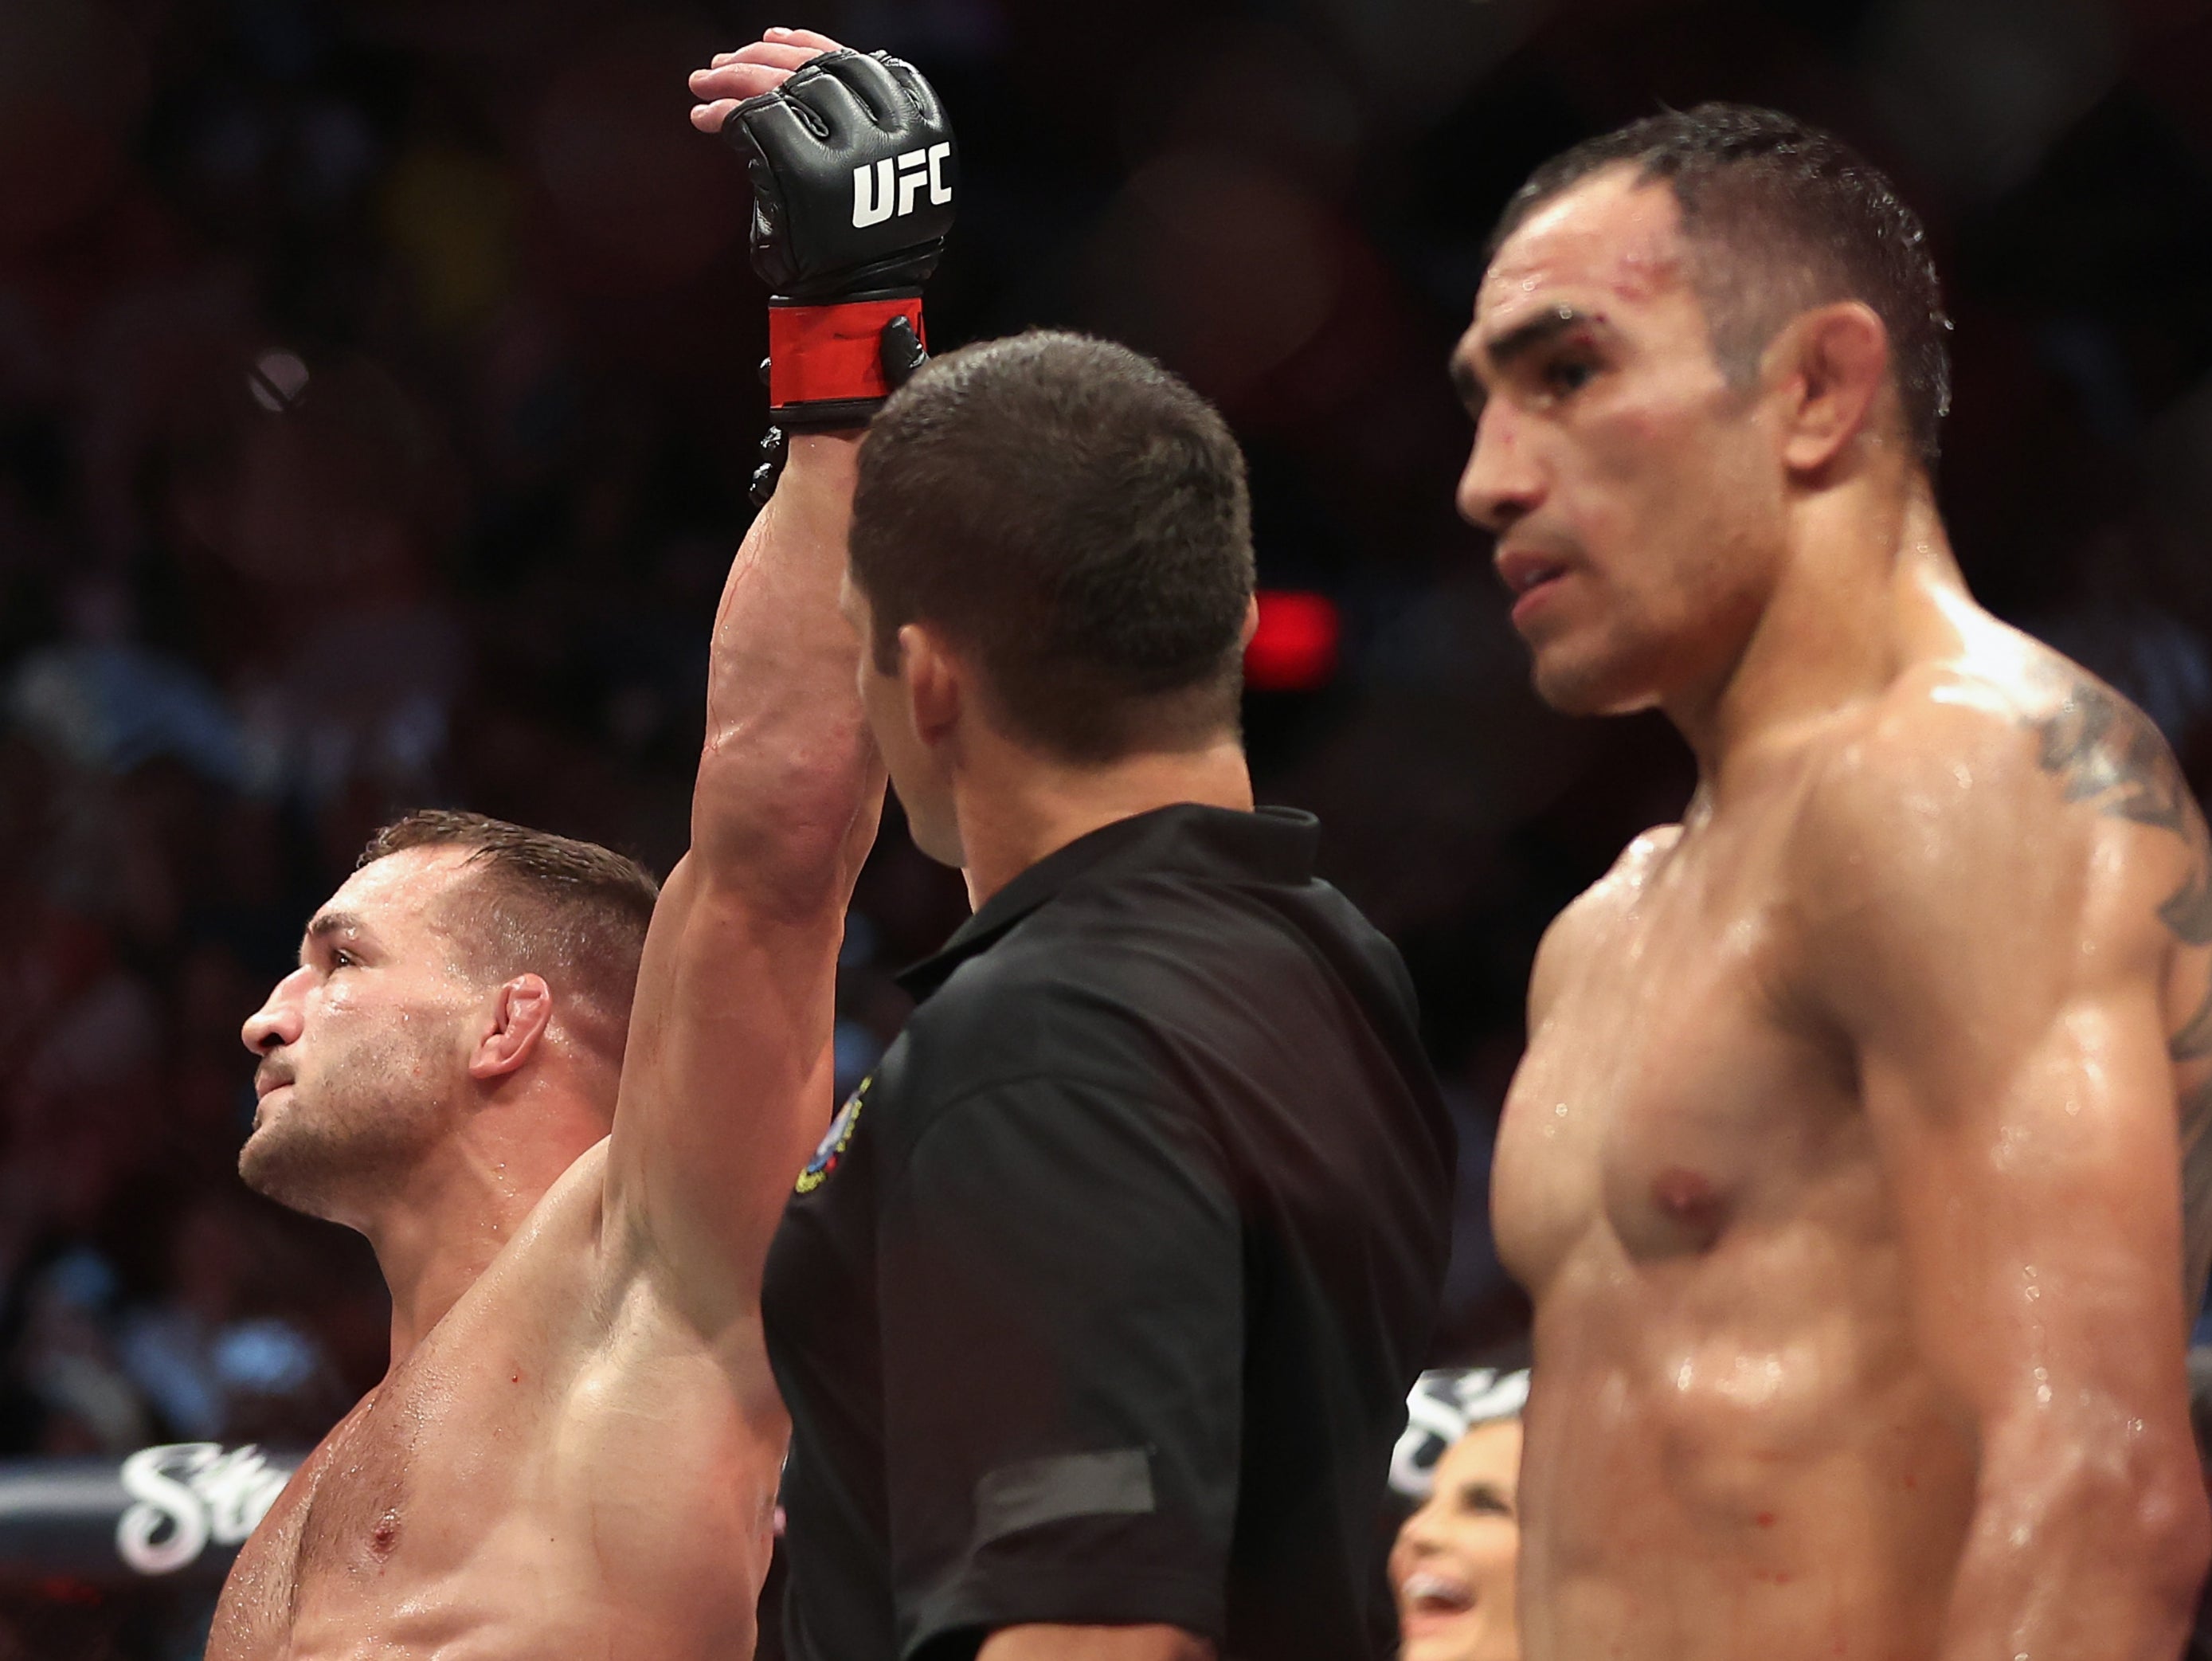 Tony Ferguson (right) seems determined to keep fighting and get back in the win column